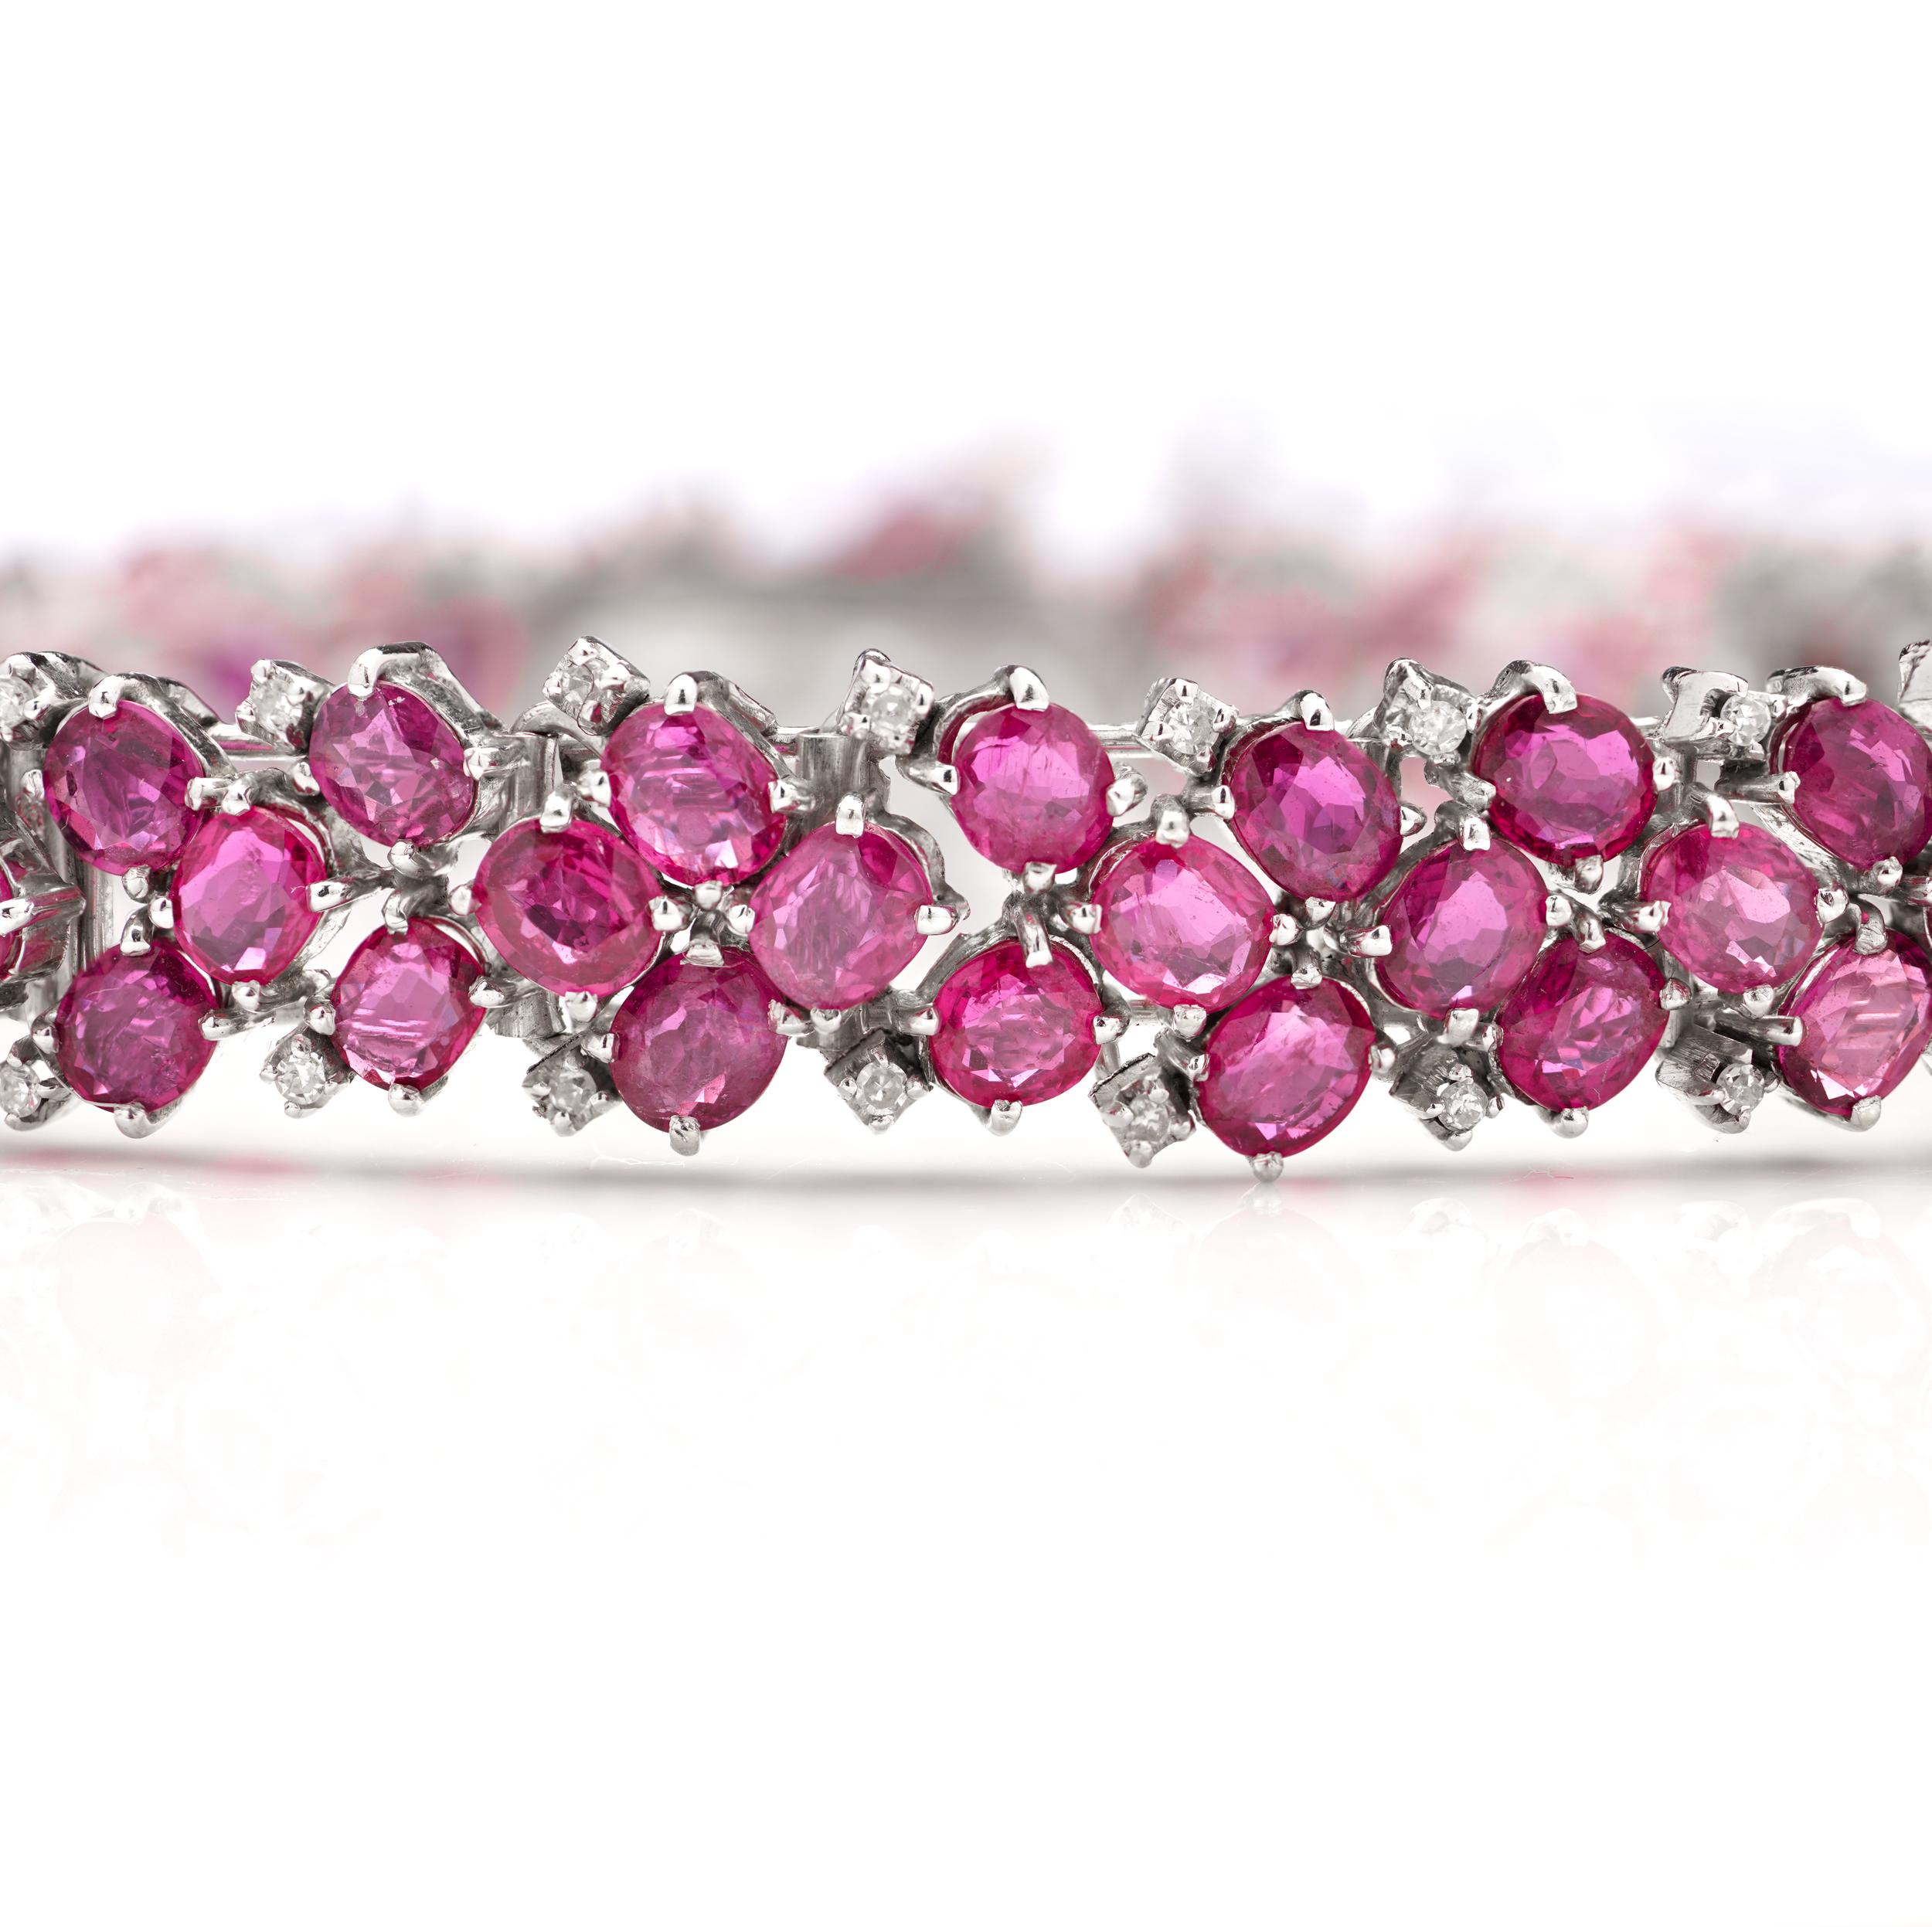 14kt. white gold link bracelet set with 22.5 carats of oval faceted rubies  For Sale 3